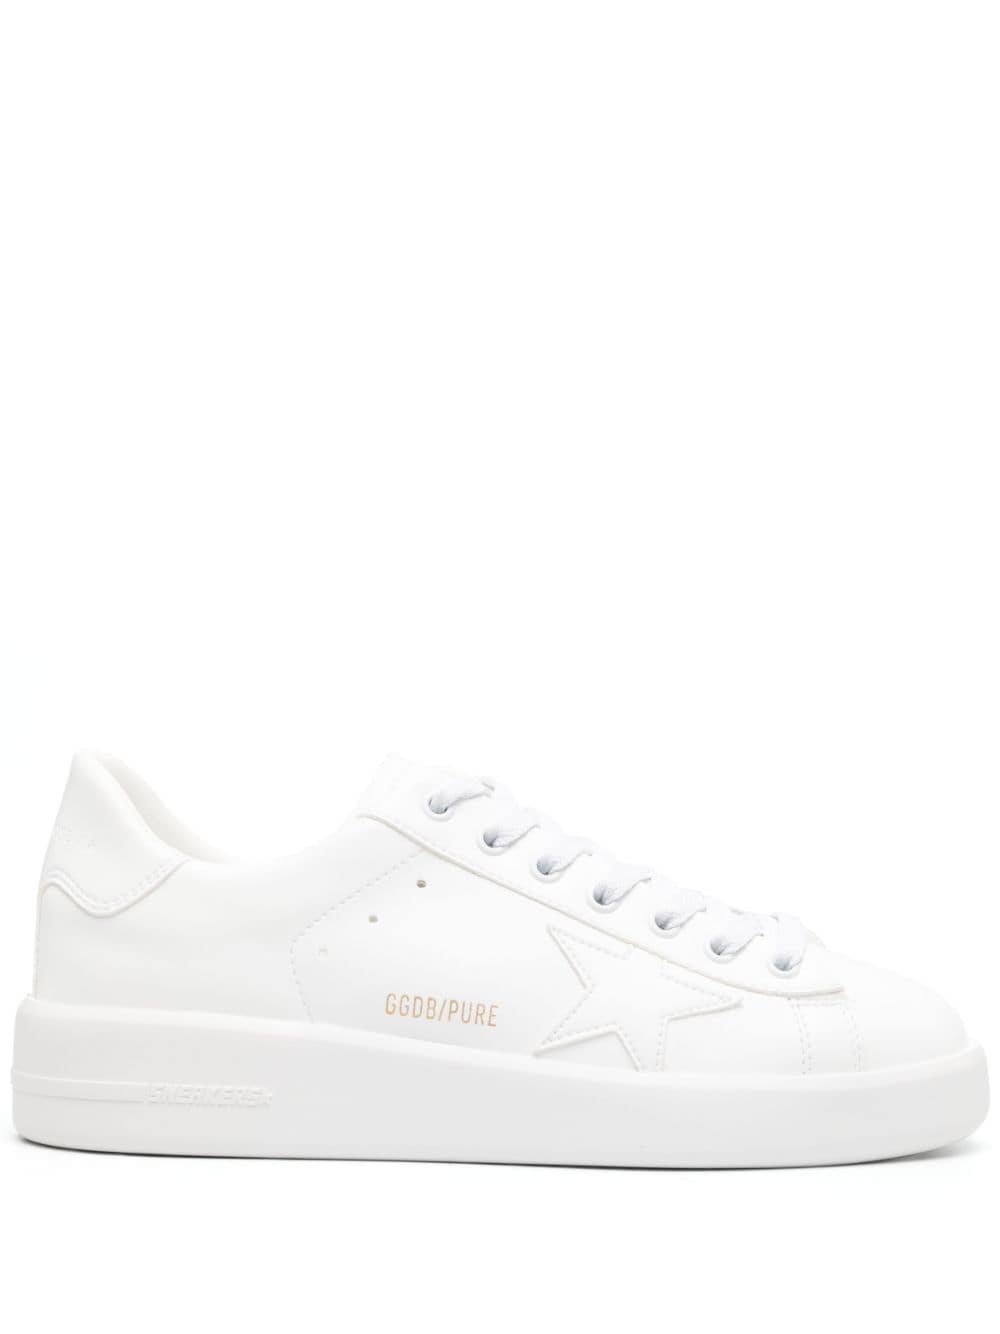 GOLDEN GOOSE PURE STAR LEATHER Sneaker